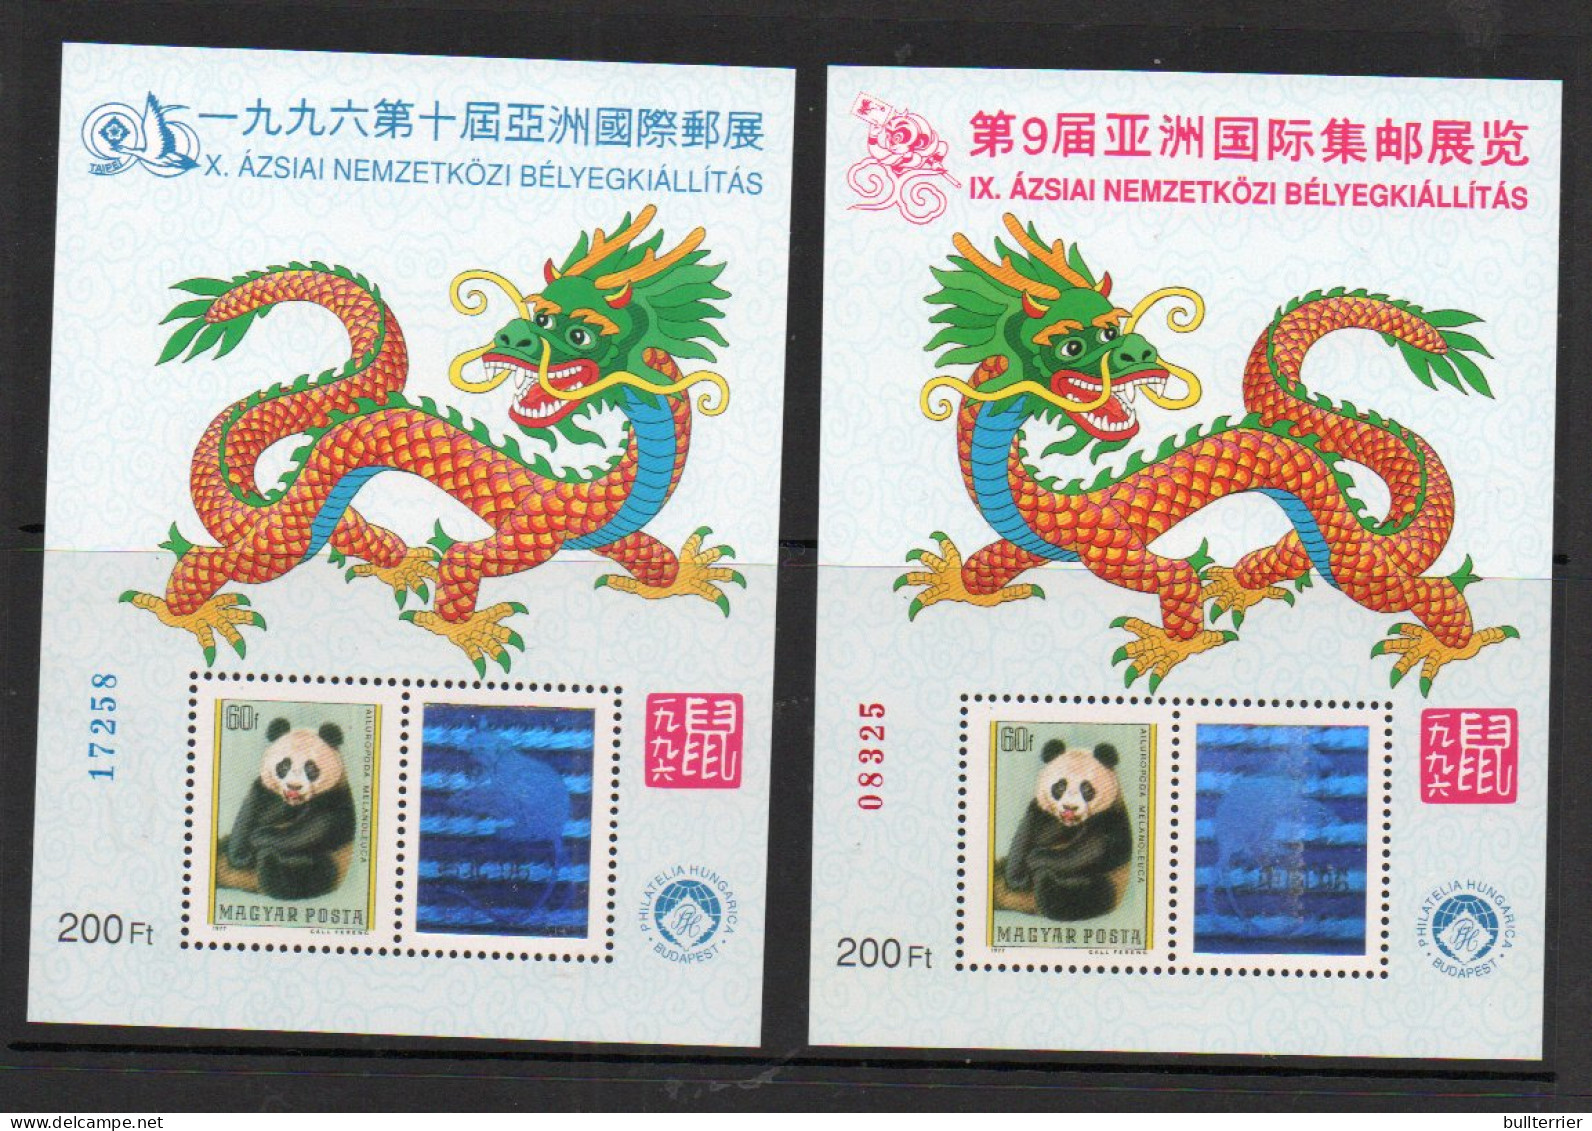 HOLOGRAMS - HUNGARY - TAIPEI /YEAR OF DRAGON /  HOLOGRAM S/SHEETS  MINT NEVER HINGED,  - Hologrammes